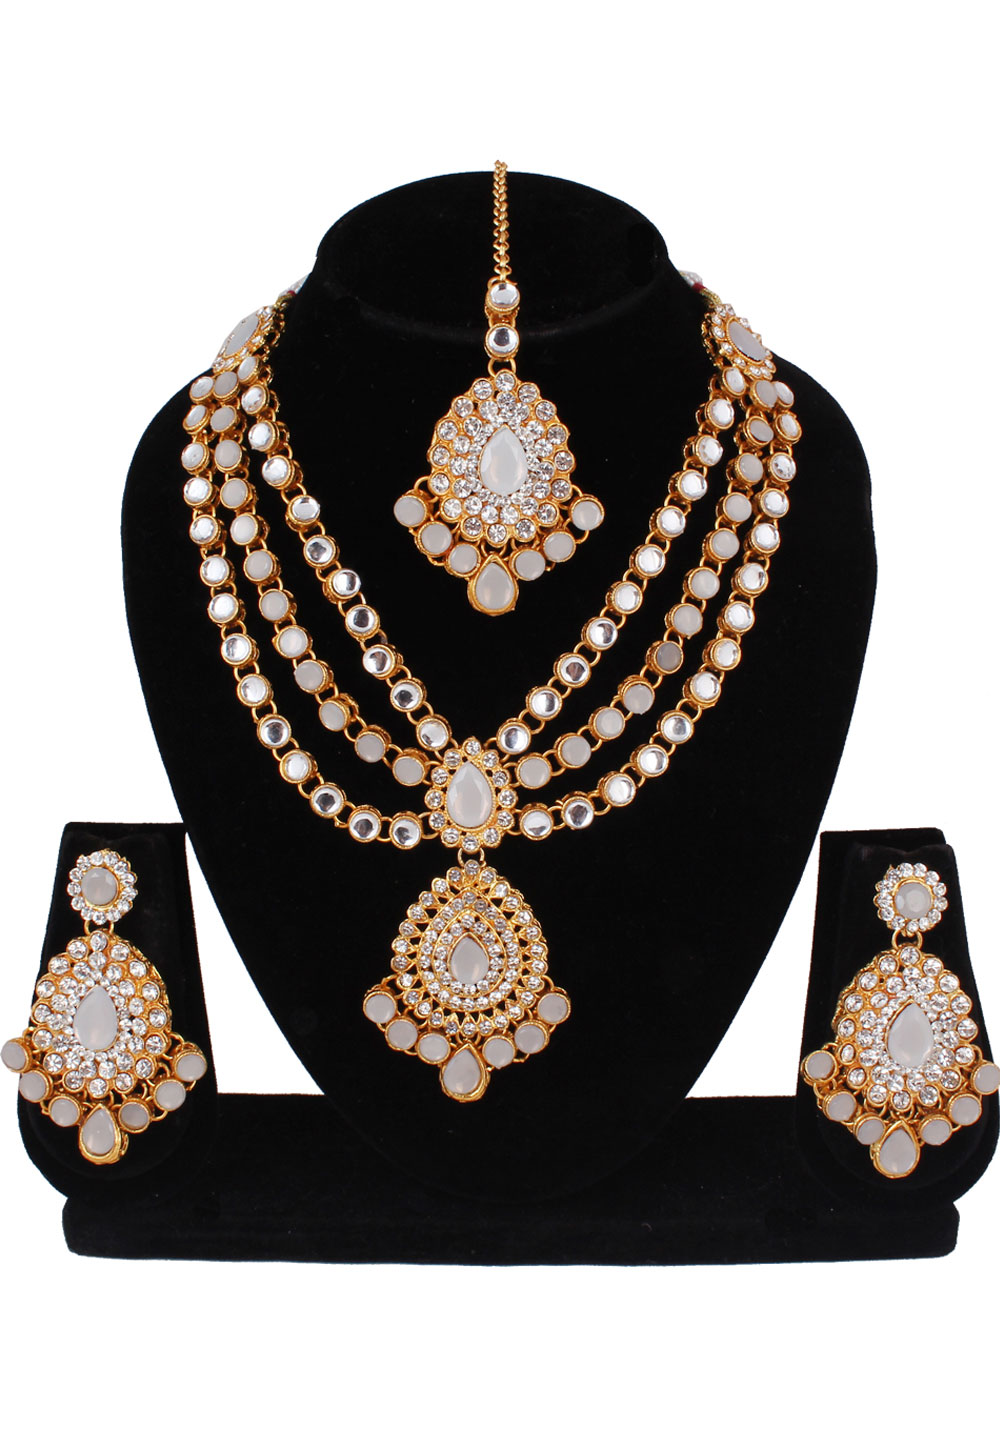 Off White Alloy Necklace Set With Earrings and Maang Tikka 257350